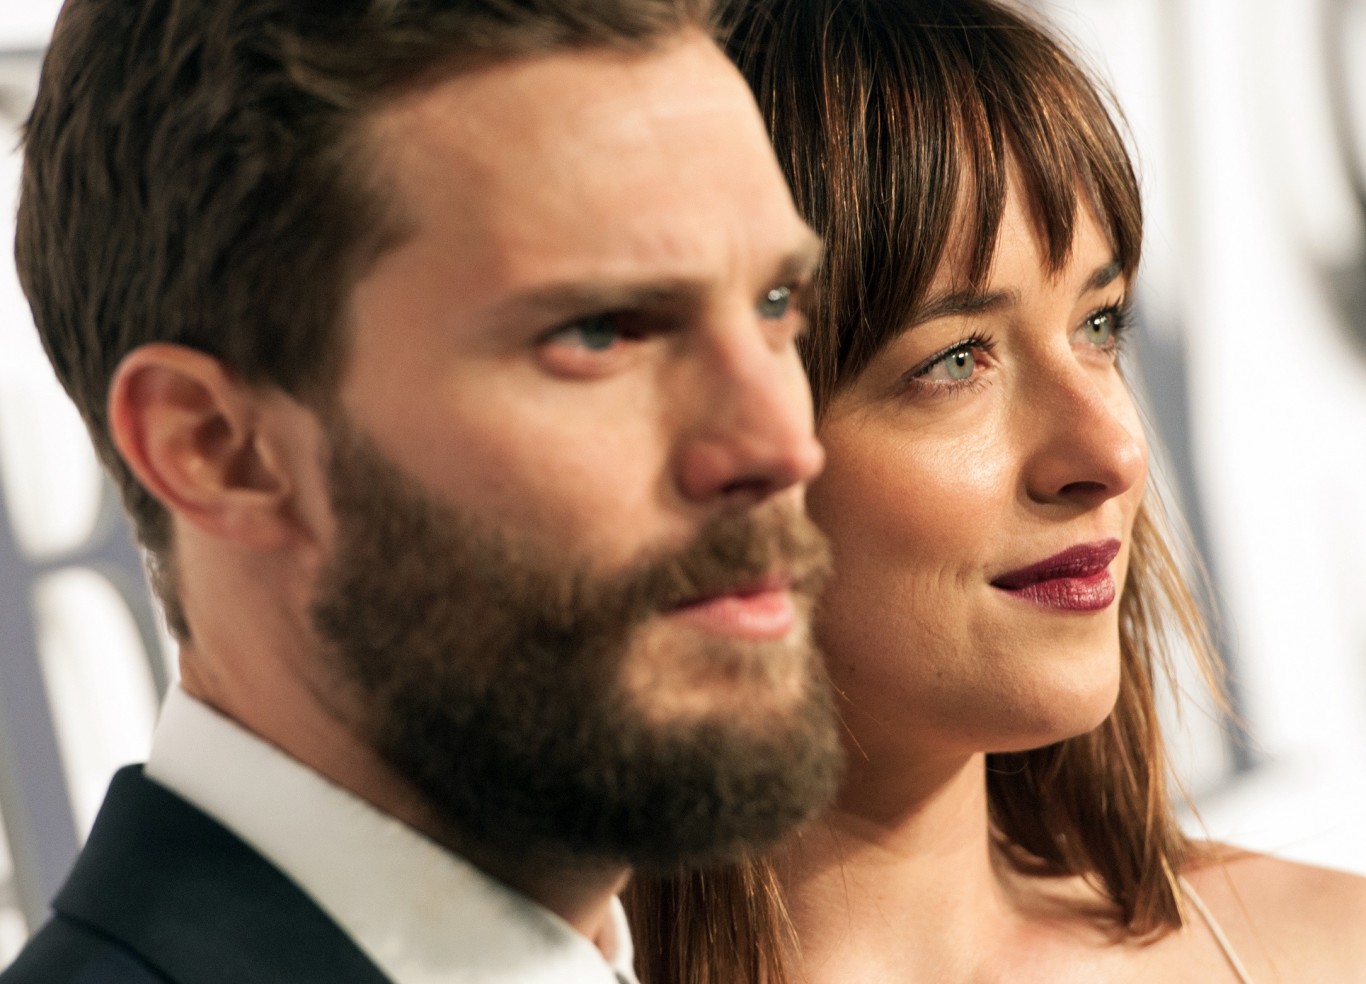 Steamy soundtrack revealed for Fifty Shades Darker